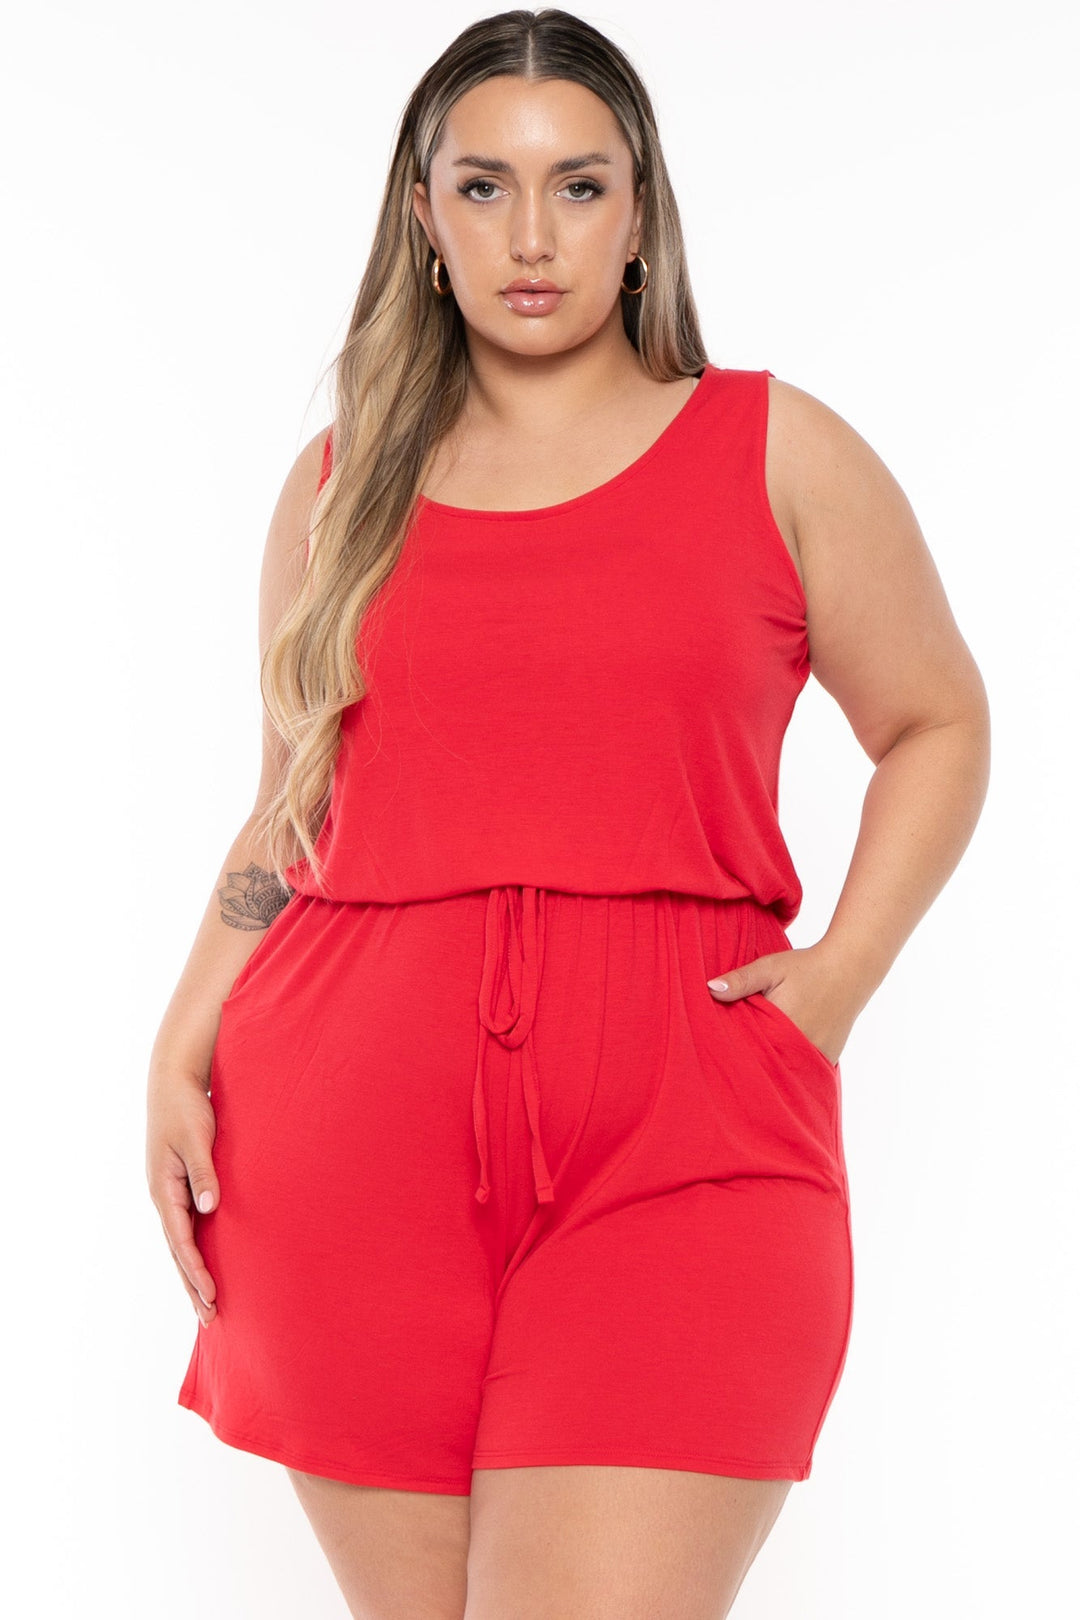 Zenana Jumpsuits and Rompers Plus Size Zenny Sleeveless  Romper - Red